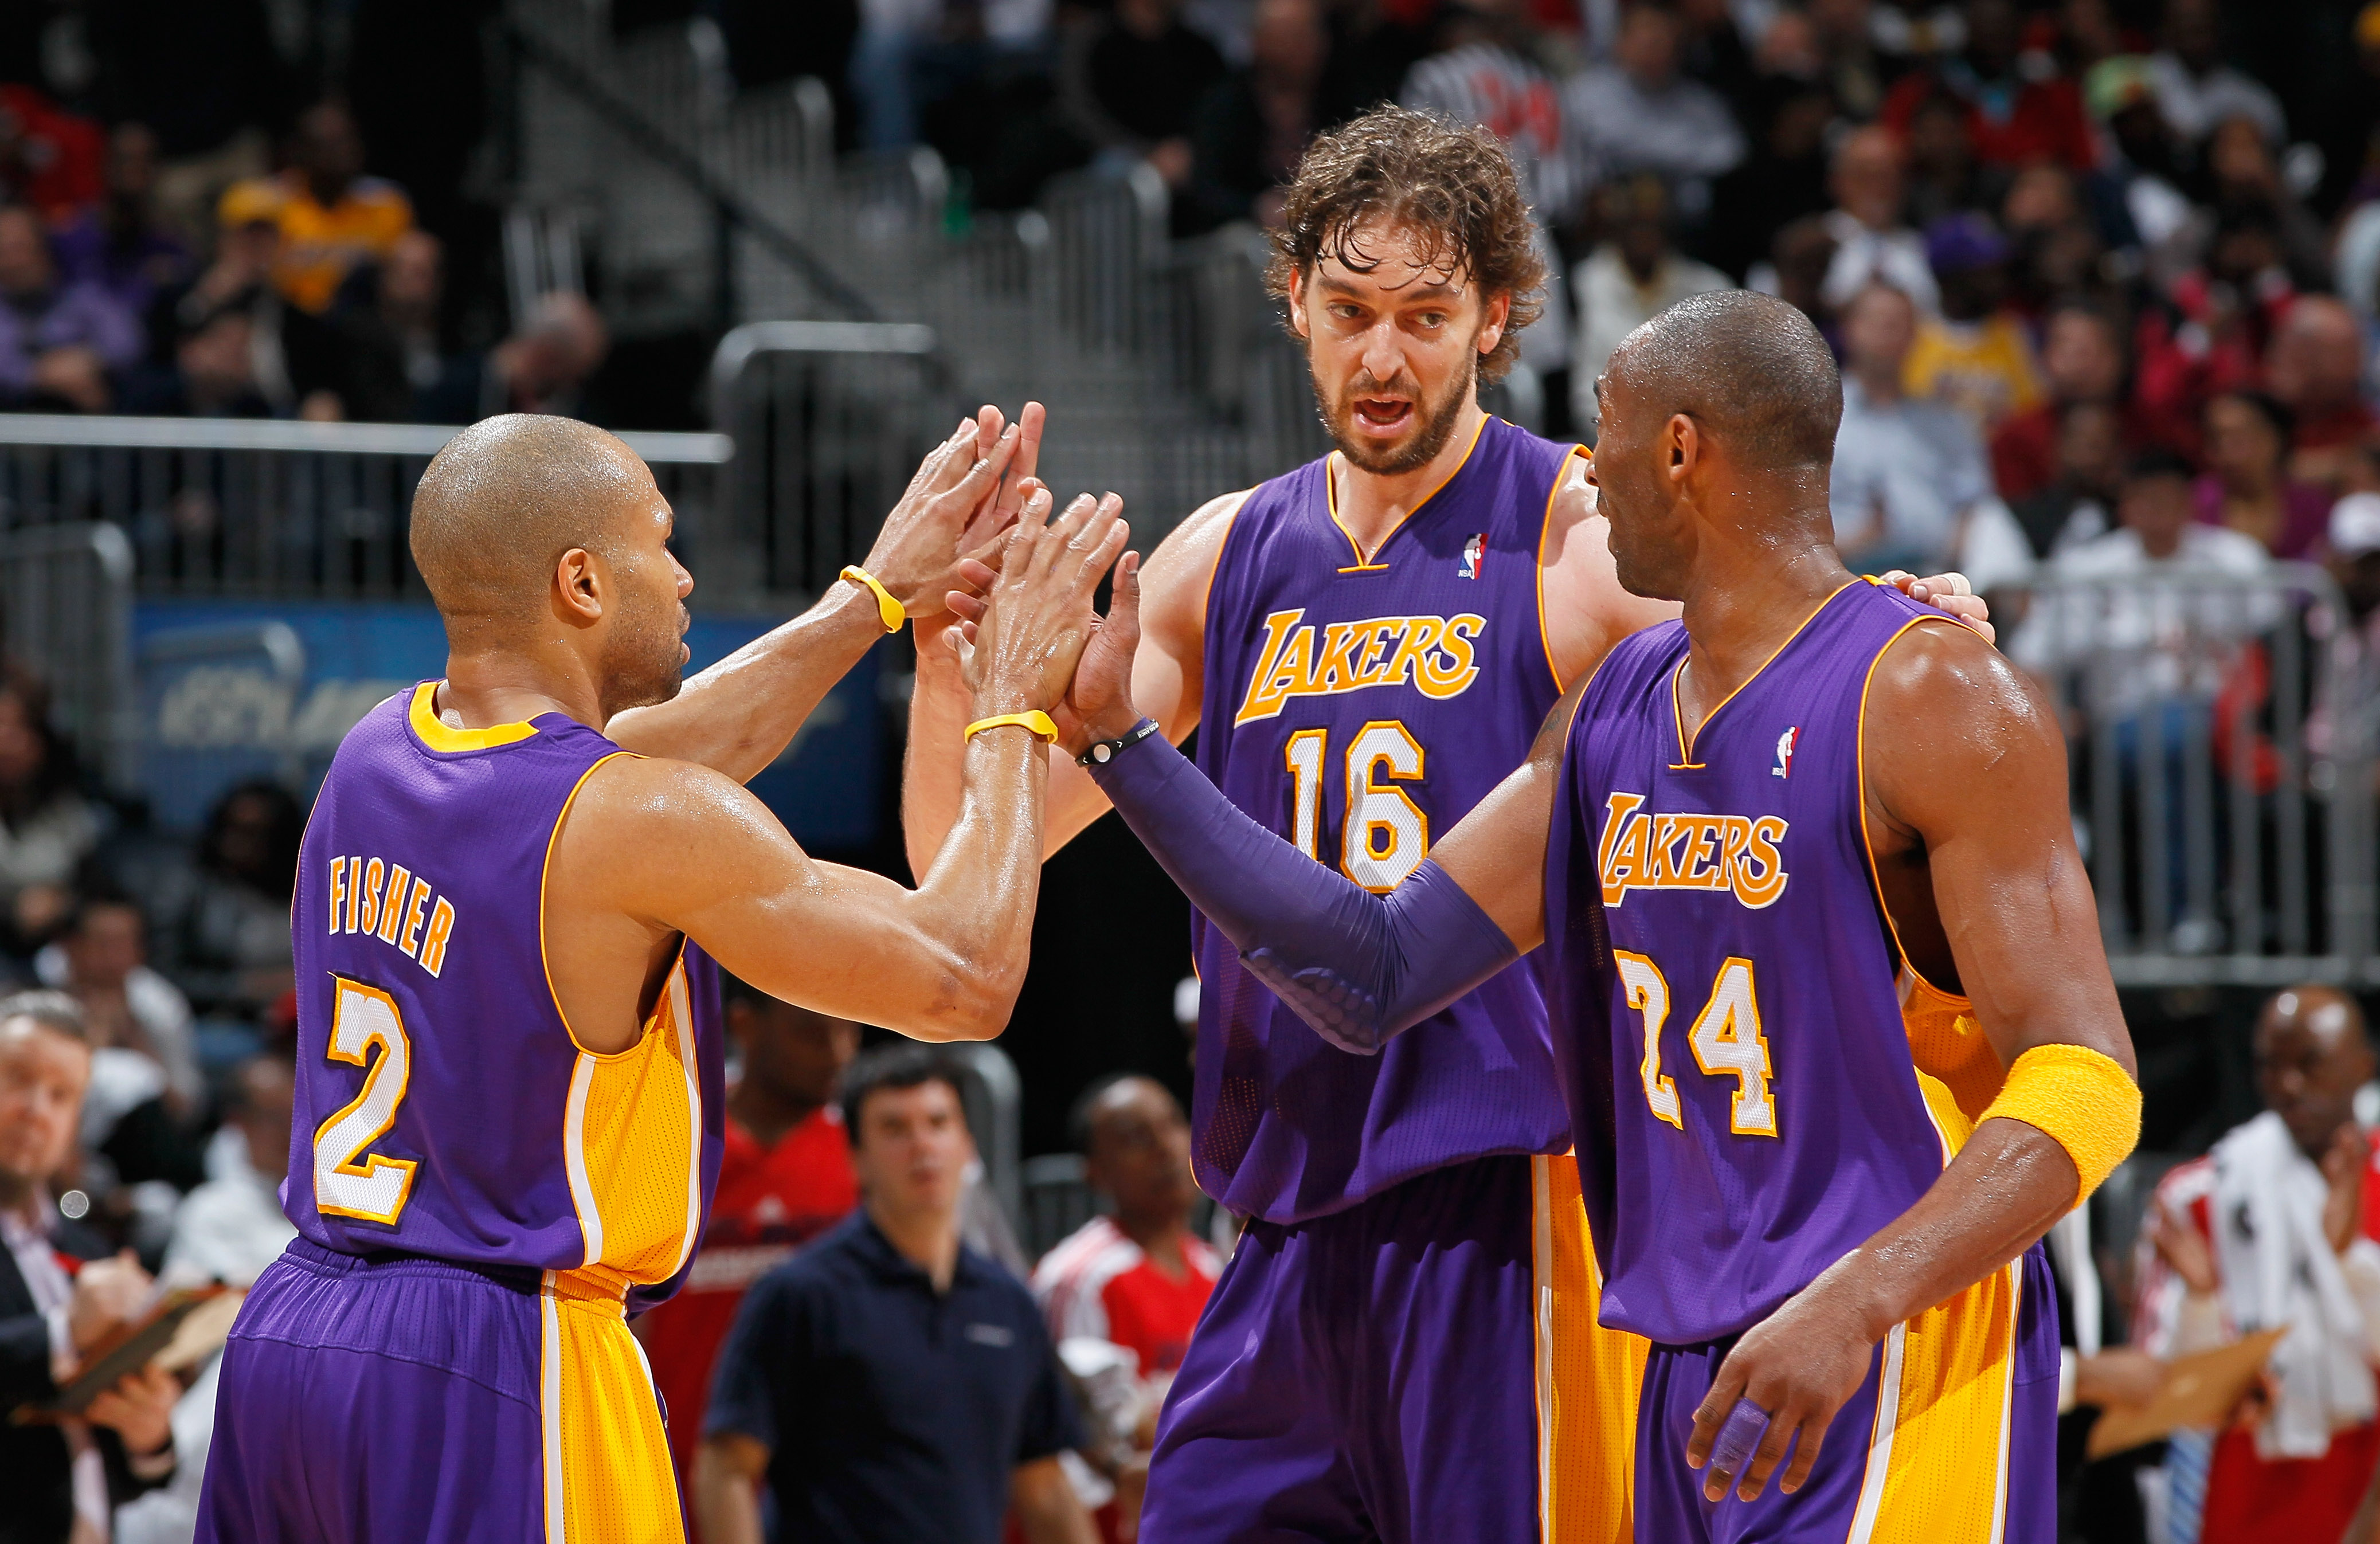 ATLANTA, GA - MARCH 08:  Derek Fisher #2, Pau Gasol #16 and Kobe Bryant #24 of the Los Angeles Lakers react after a timeout during the game against the Atlanta Hawks at Philips Arena on March 8, 2011 in Atlanta, Georgia.  NOTE TO USER: User expressly ackn